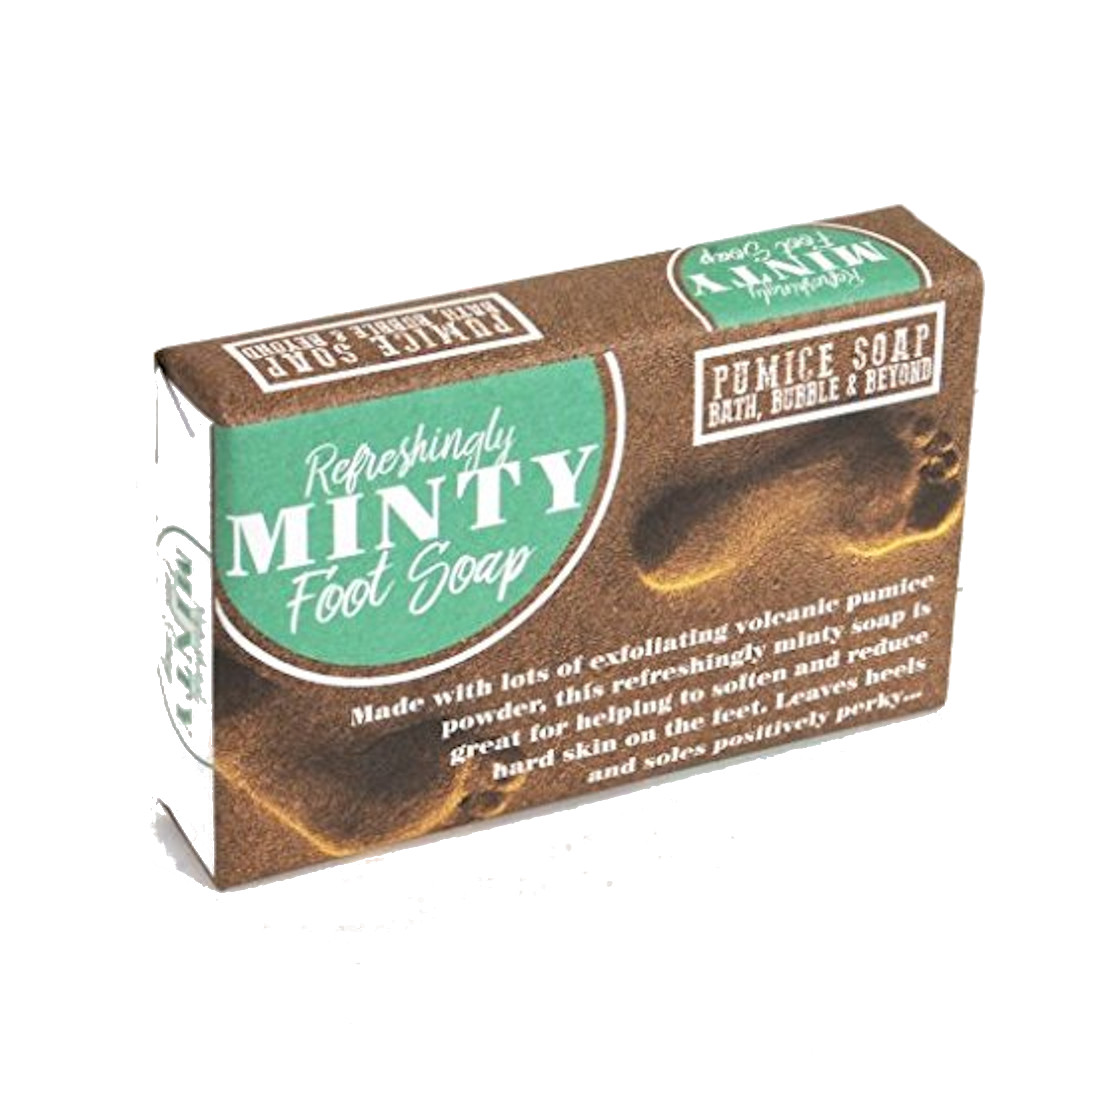 Bath Bubble and Beyond Refreshing Minty Foot Pumice Soap